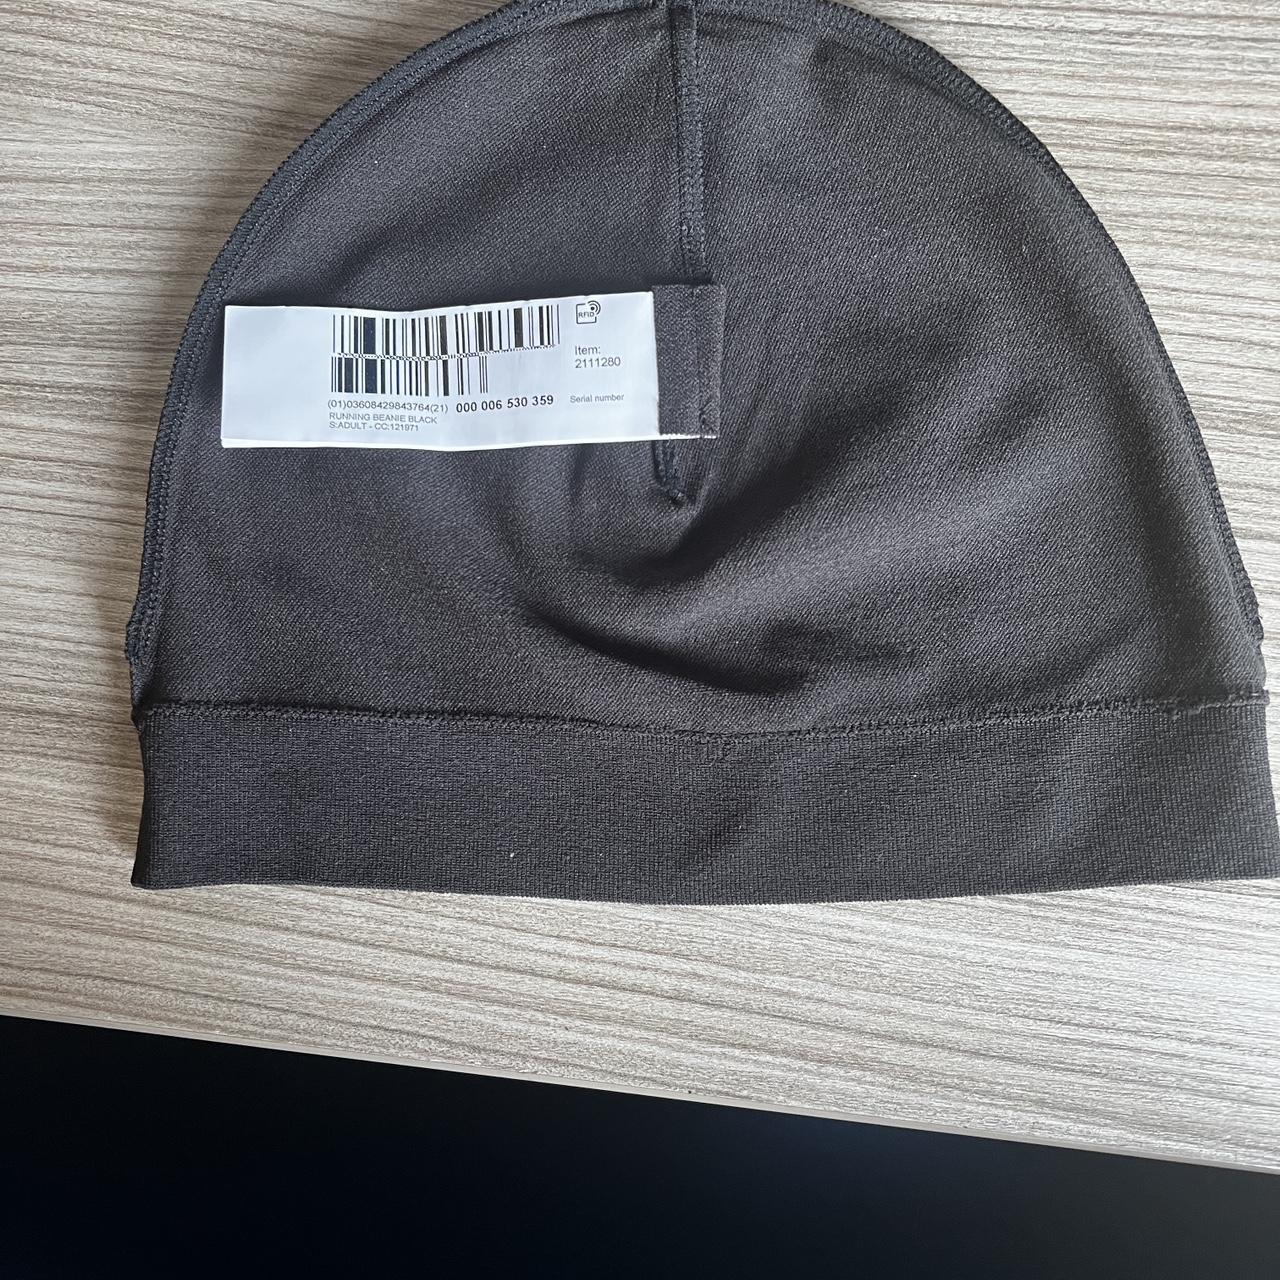 Kalenji Running hat Free delivery in the uk!!... - Depop